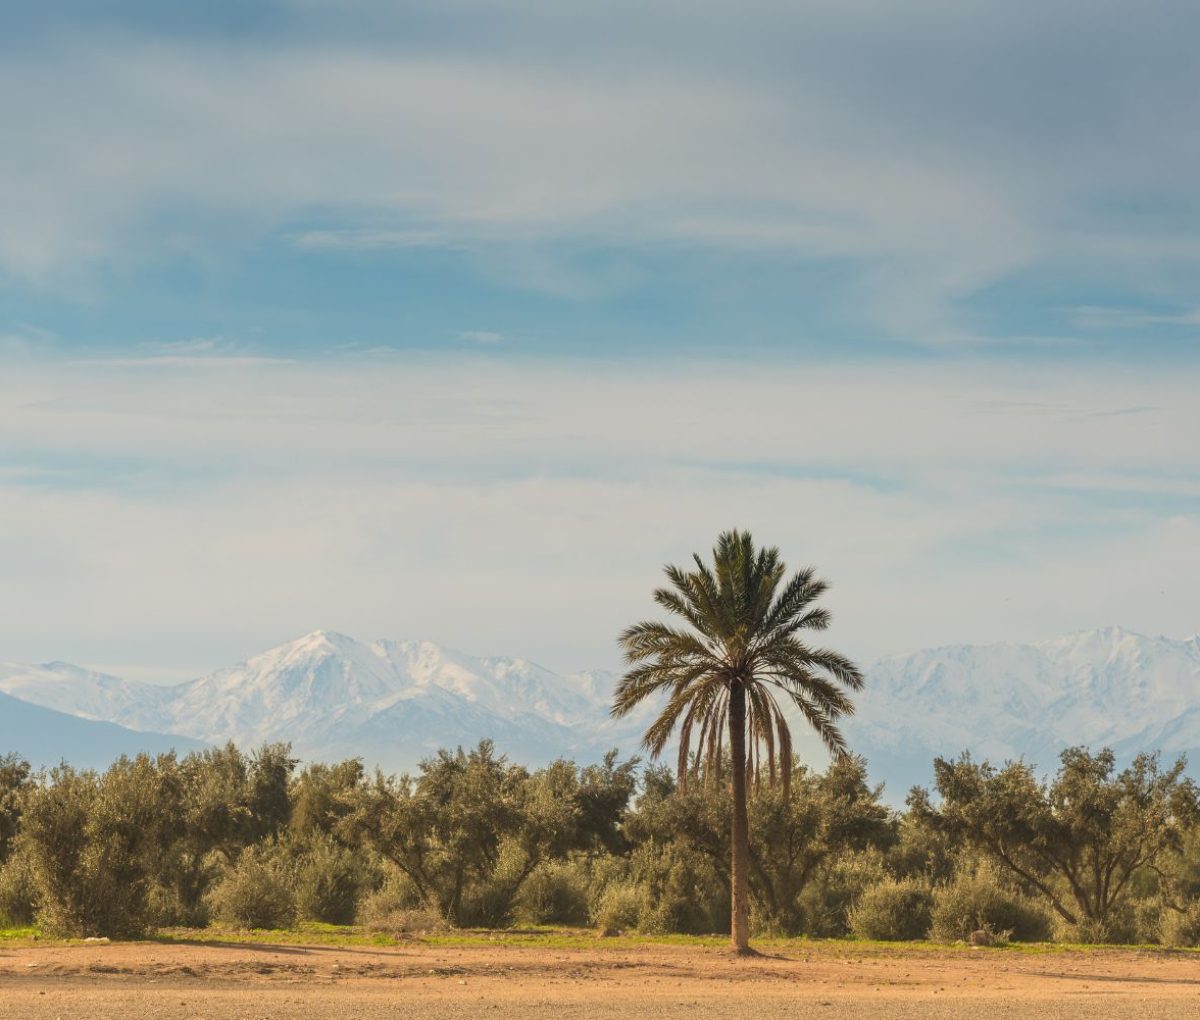 Oasis with a view of the Atlas Mountains in the distance, Morocco © onmt